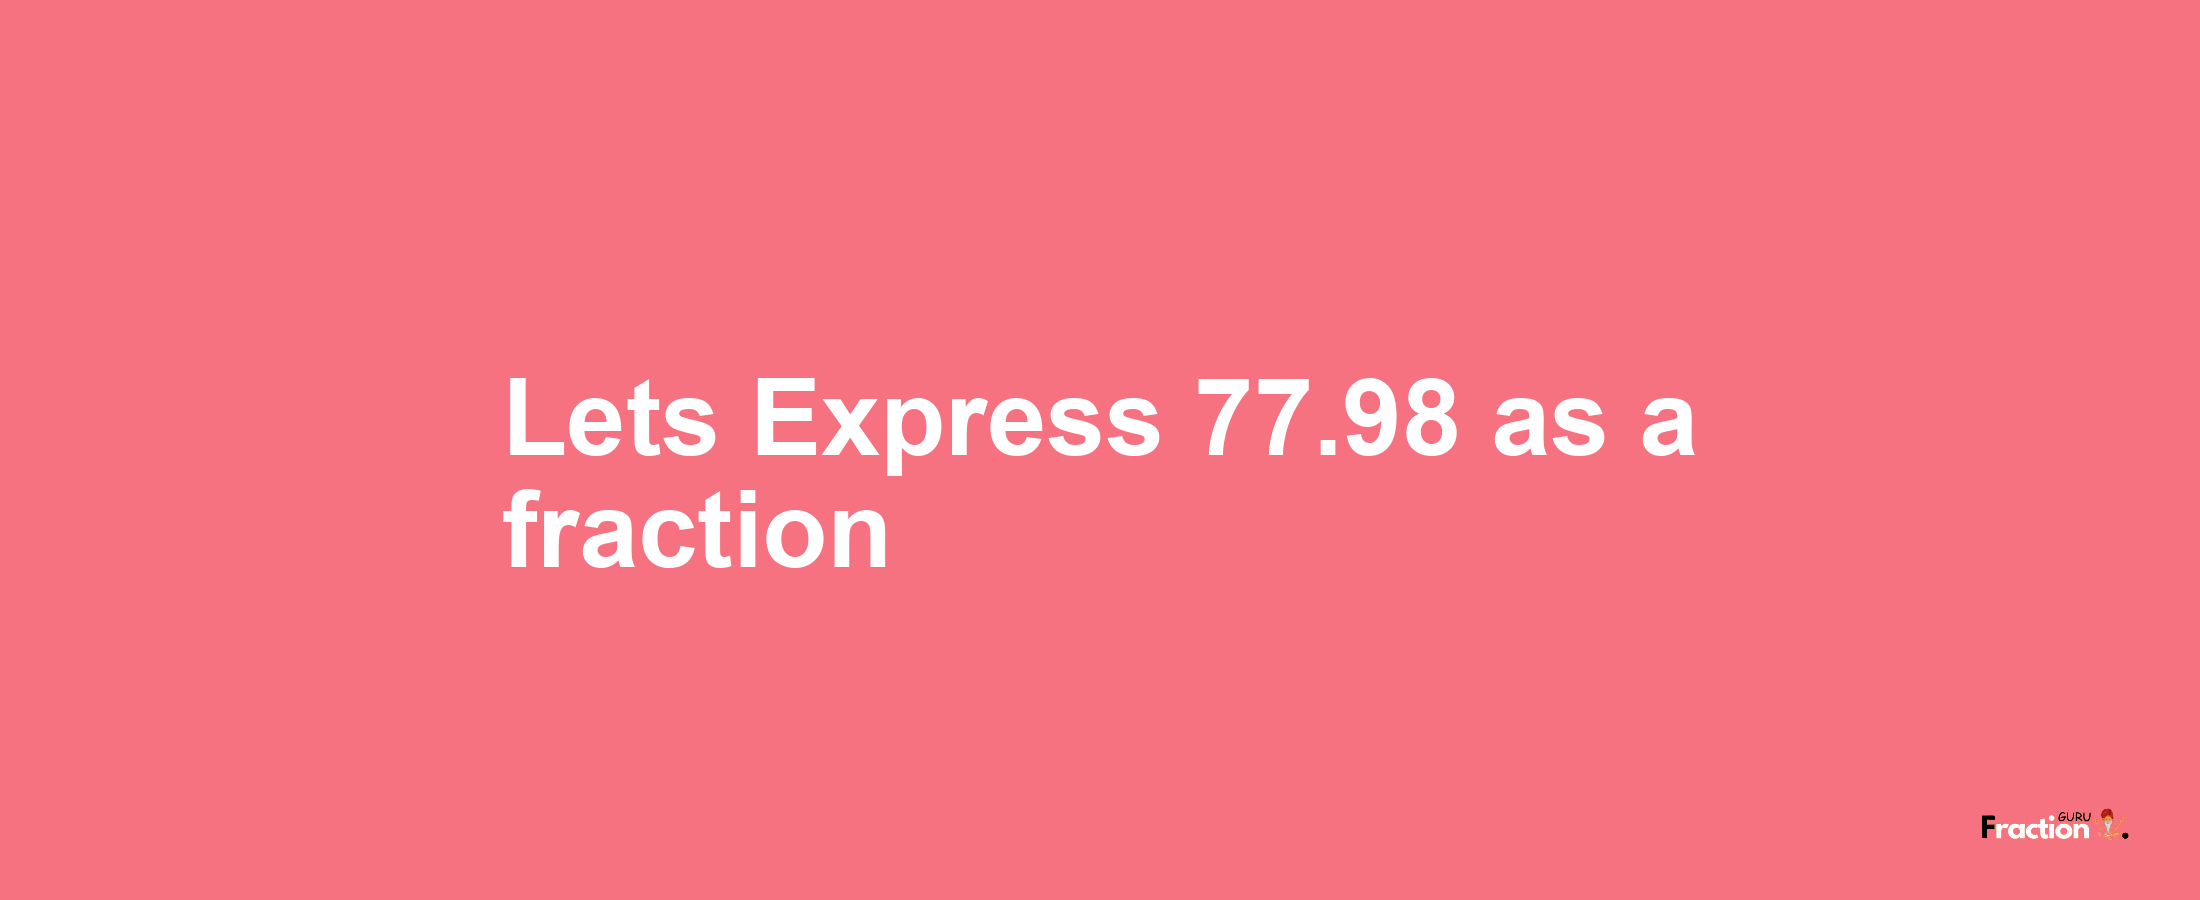 Lets Express 77.98 as afraction